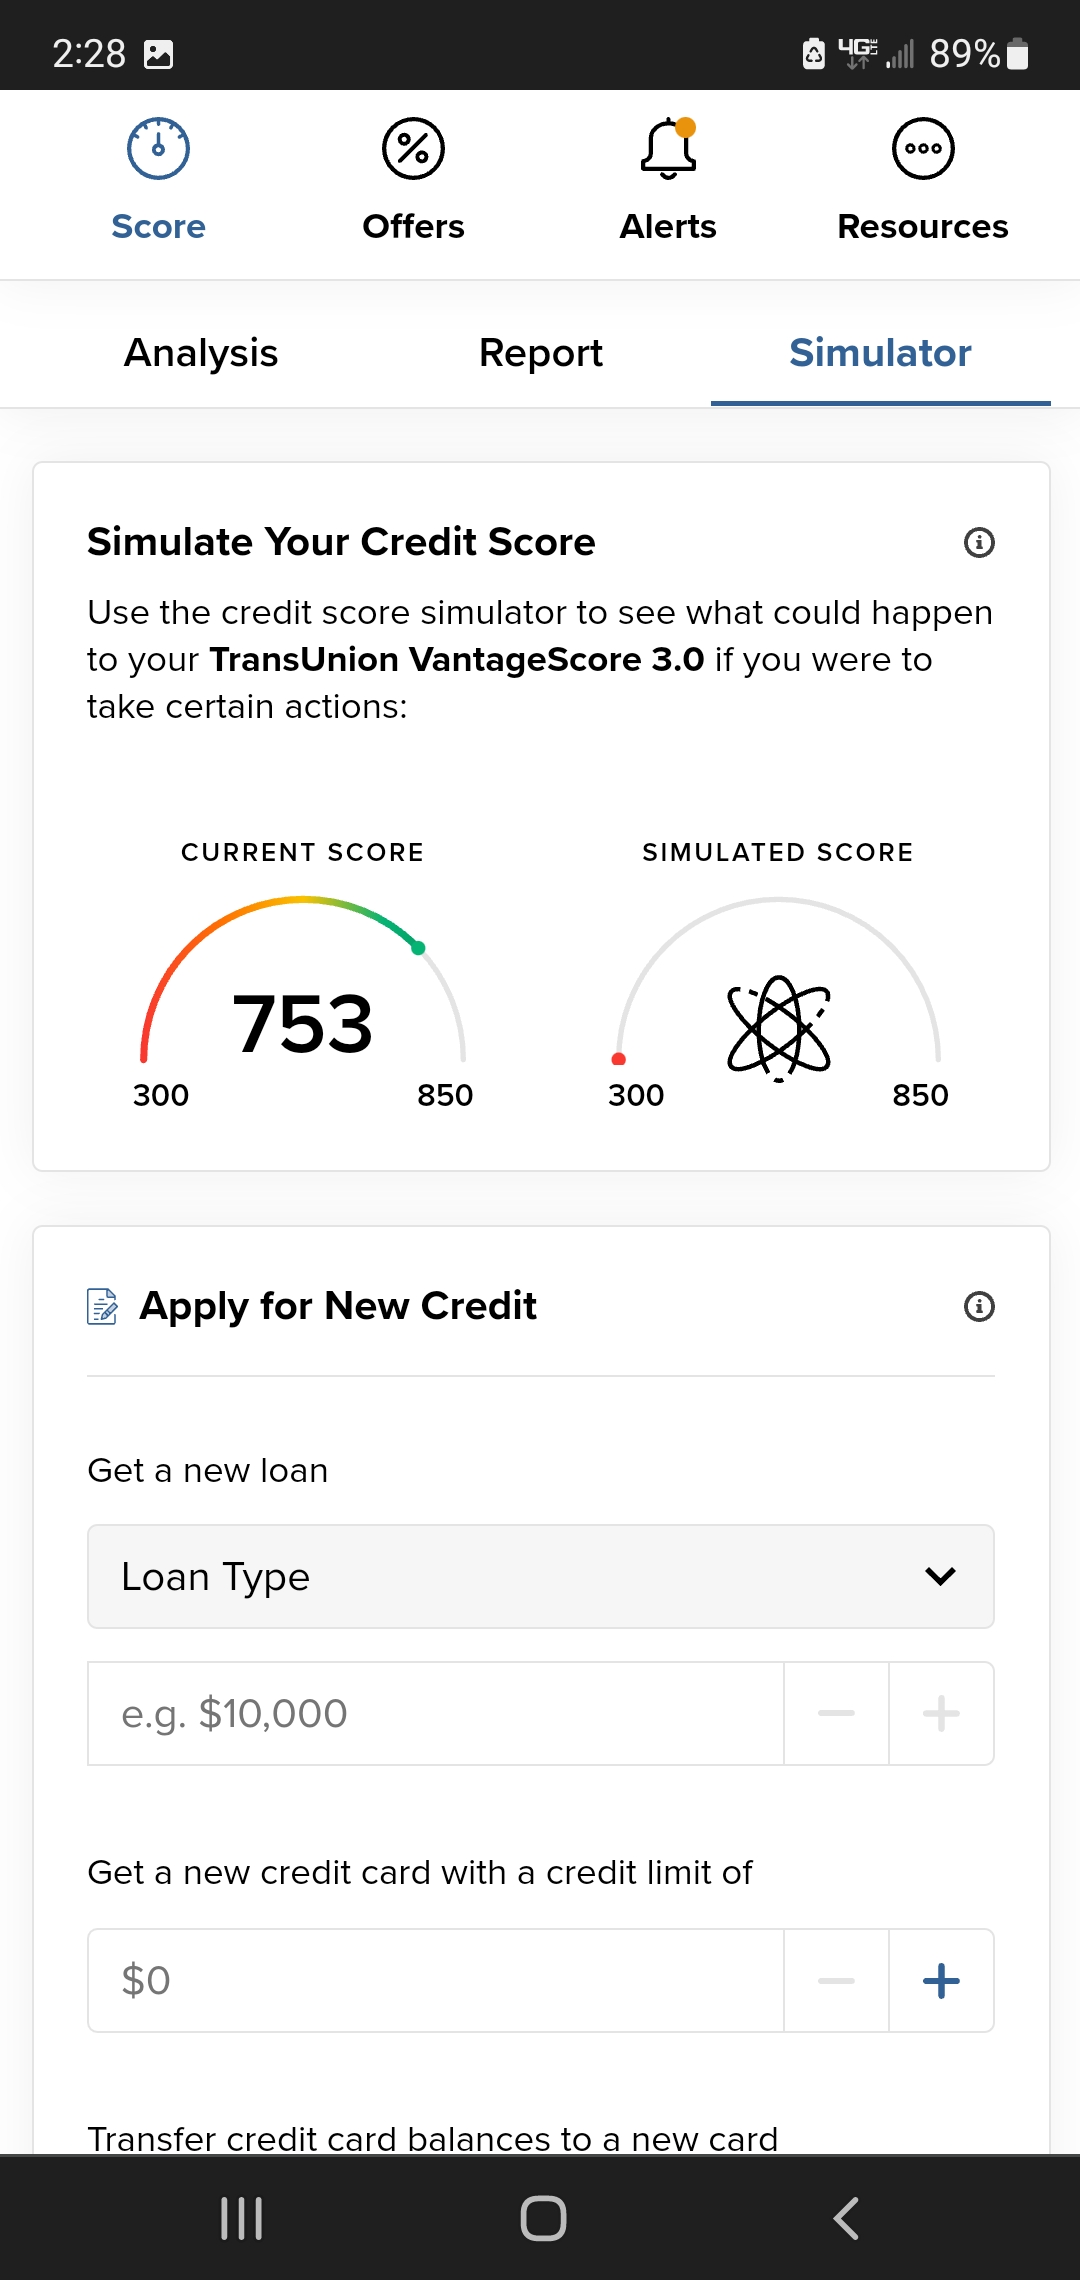 Find Ways to Improve Your Credit Score